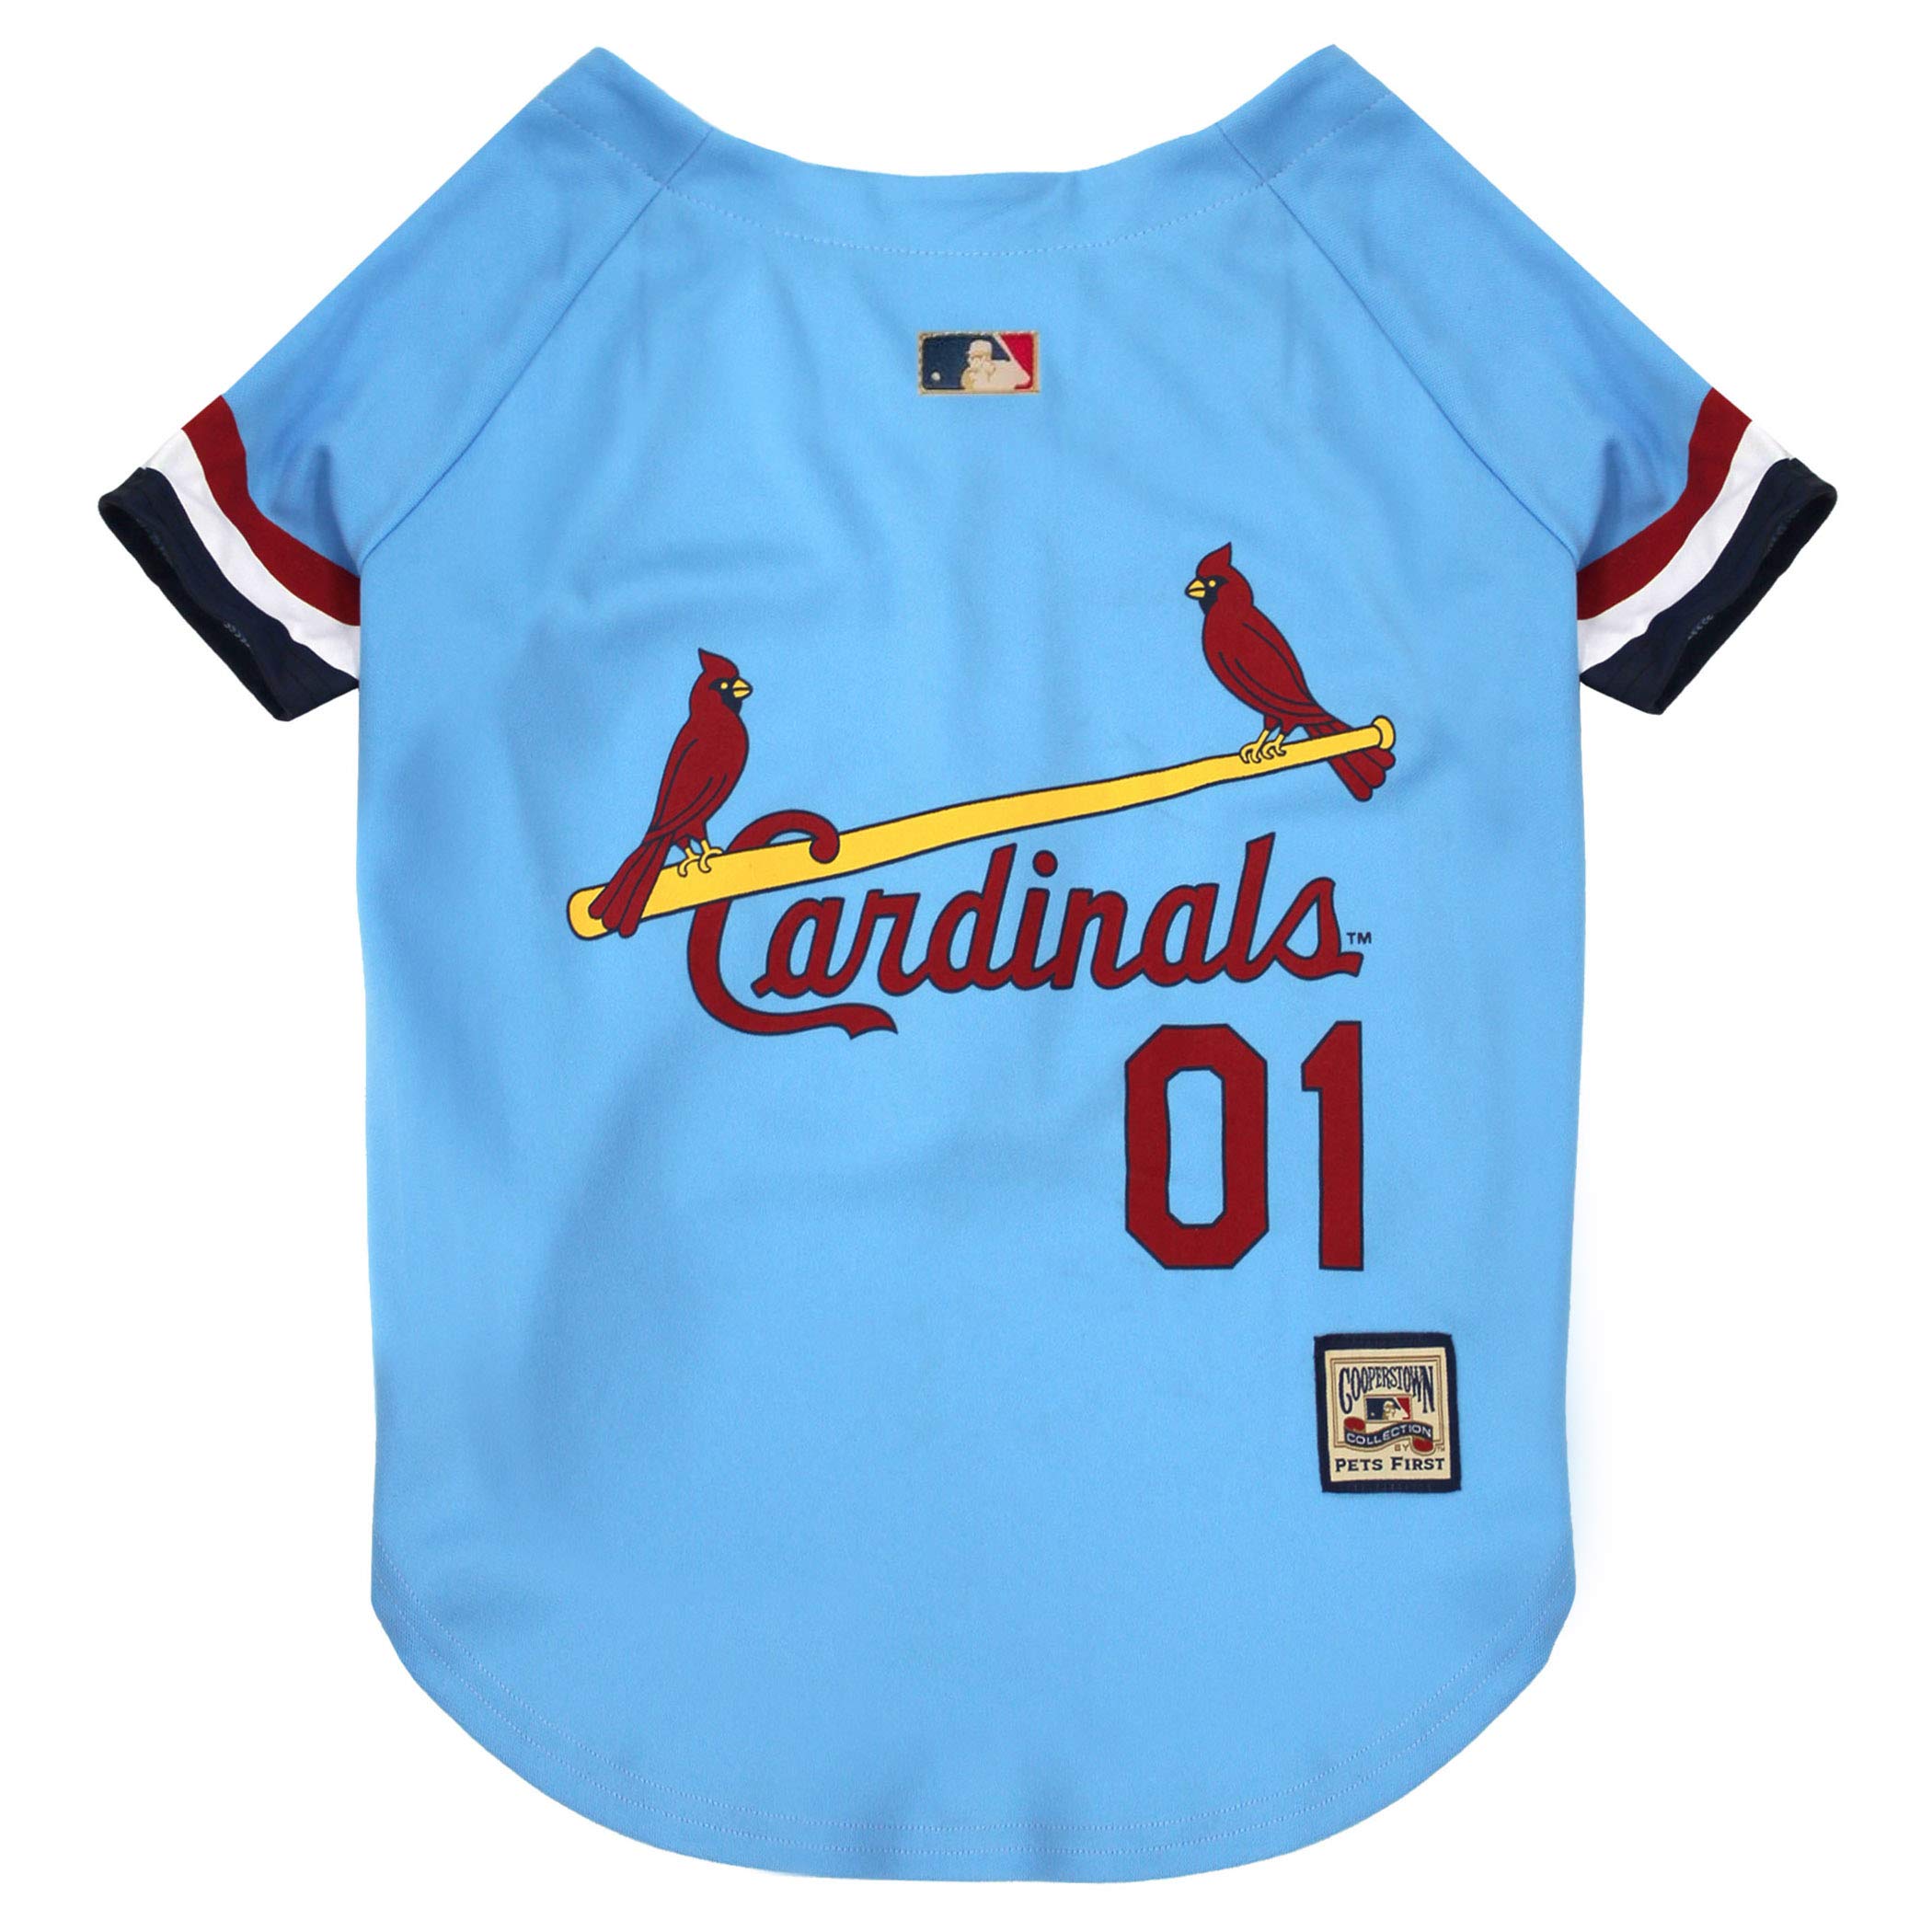 Pets First MLB St. Louis Cardinals Mesh Jersey for Dogs and Cats